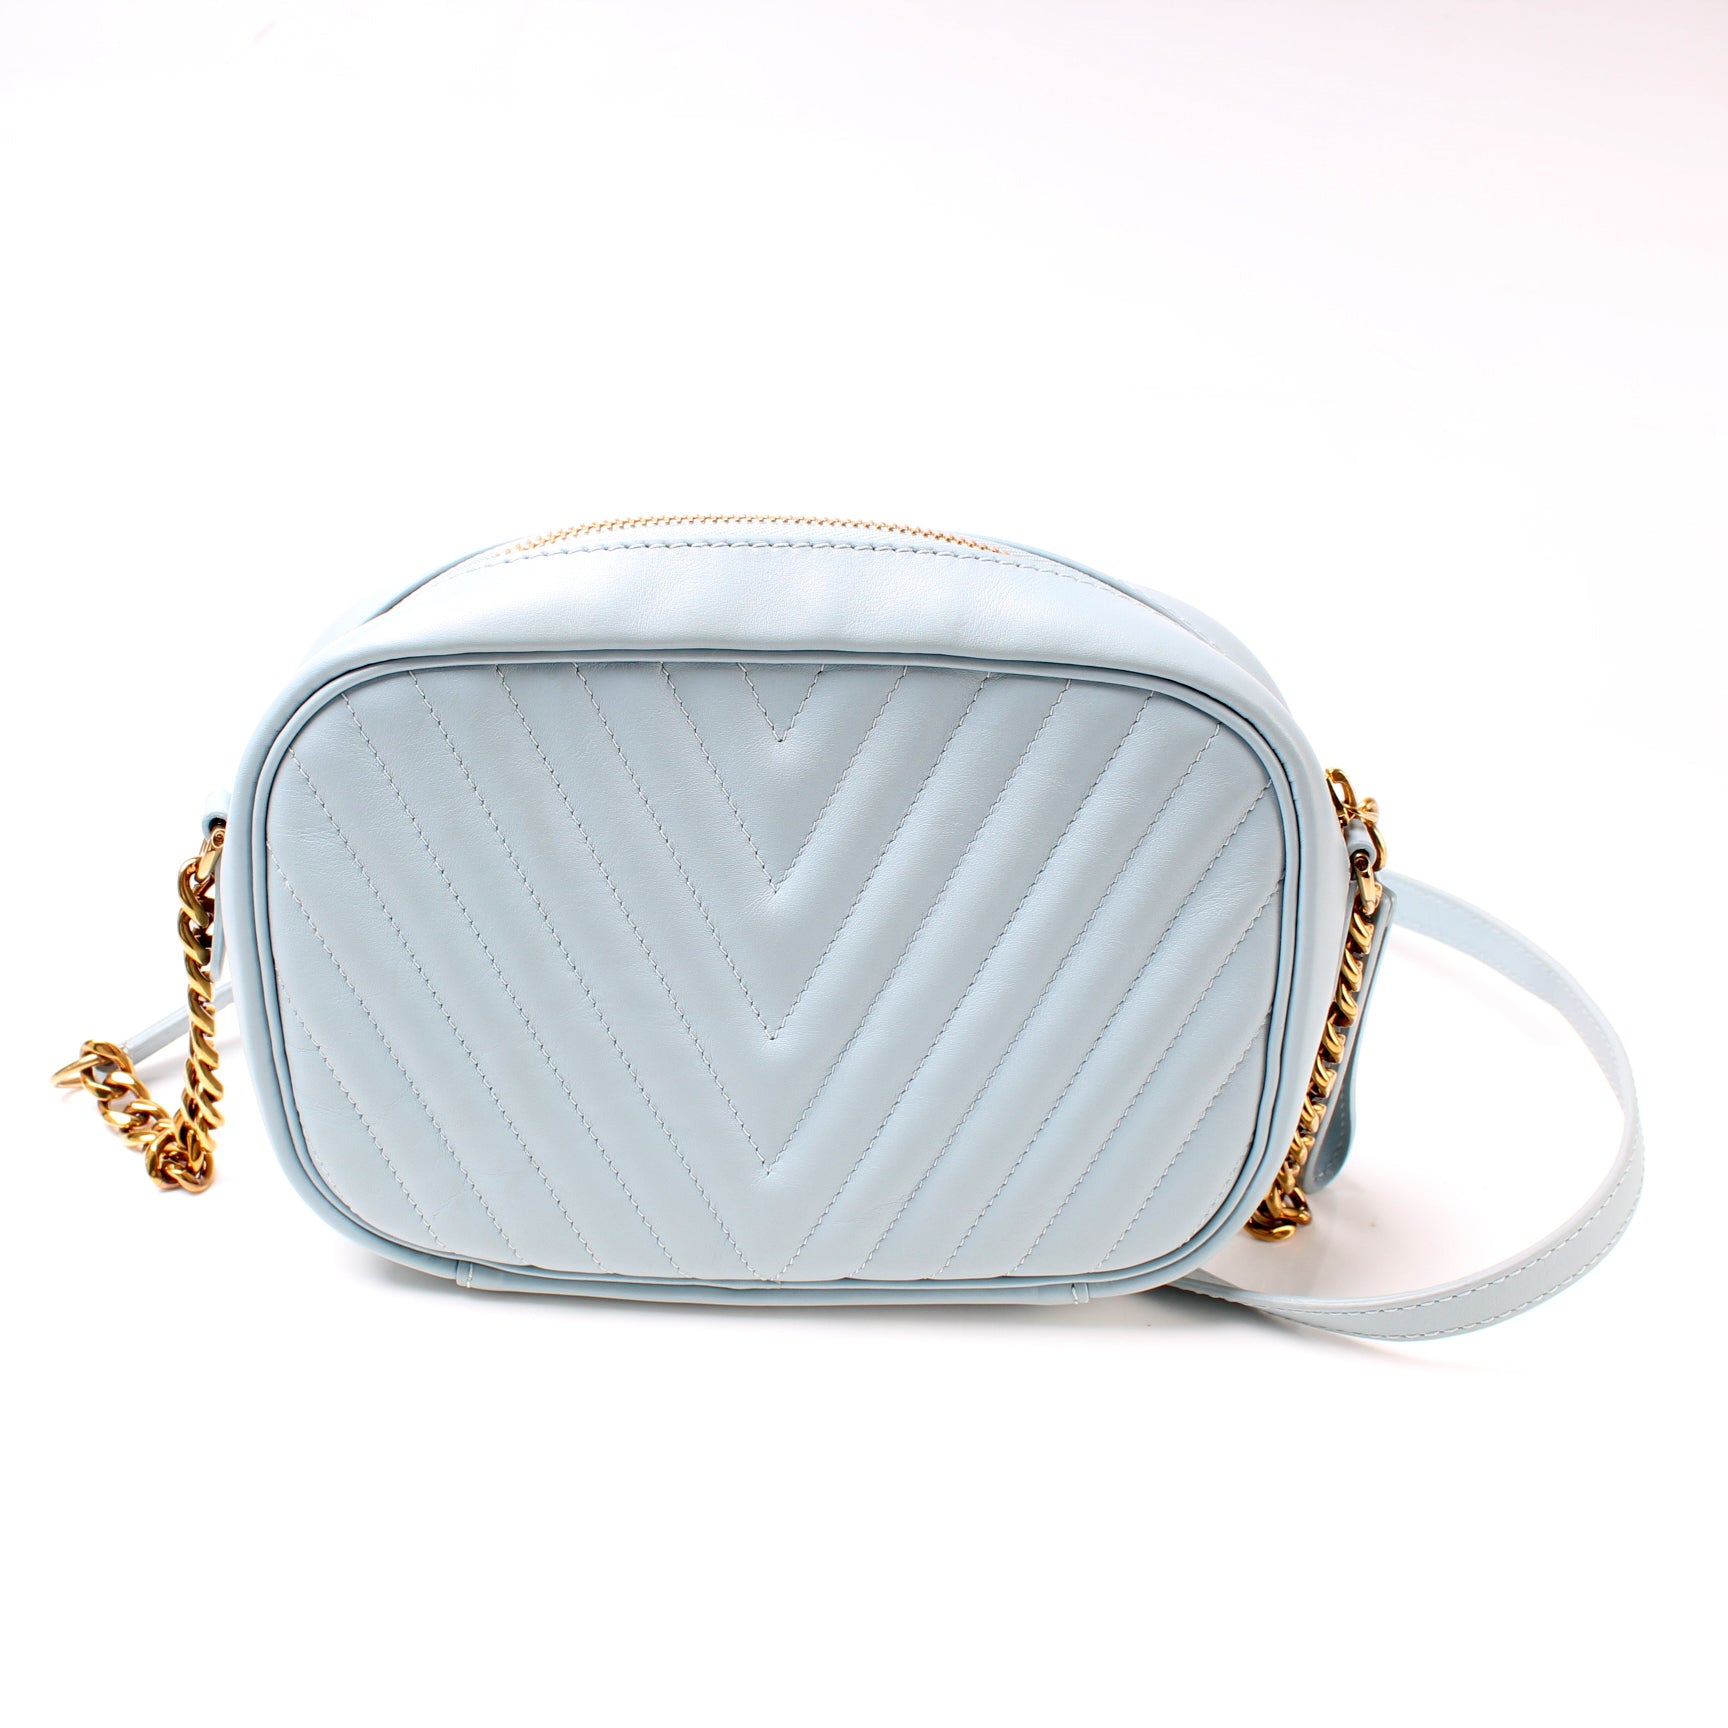 LOUIS VUITTON New Wave Quilted Leather Camera Bag Light Blue